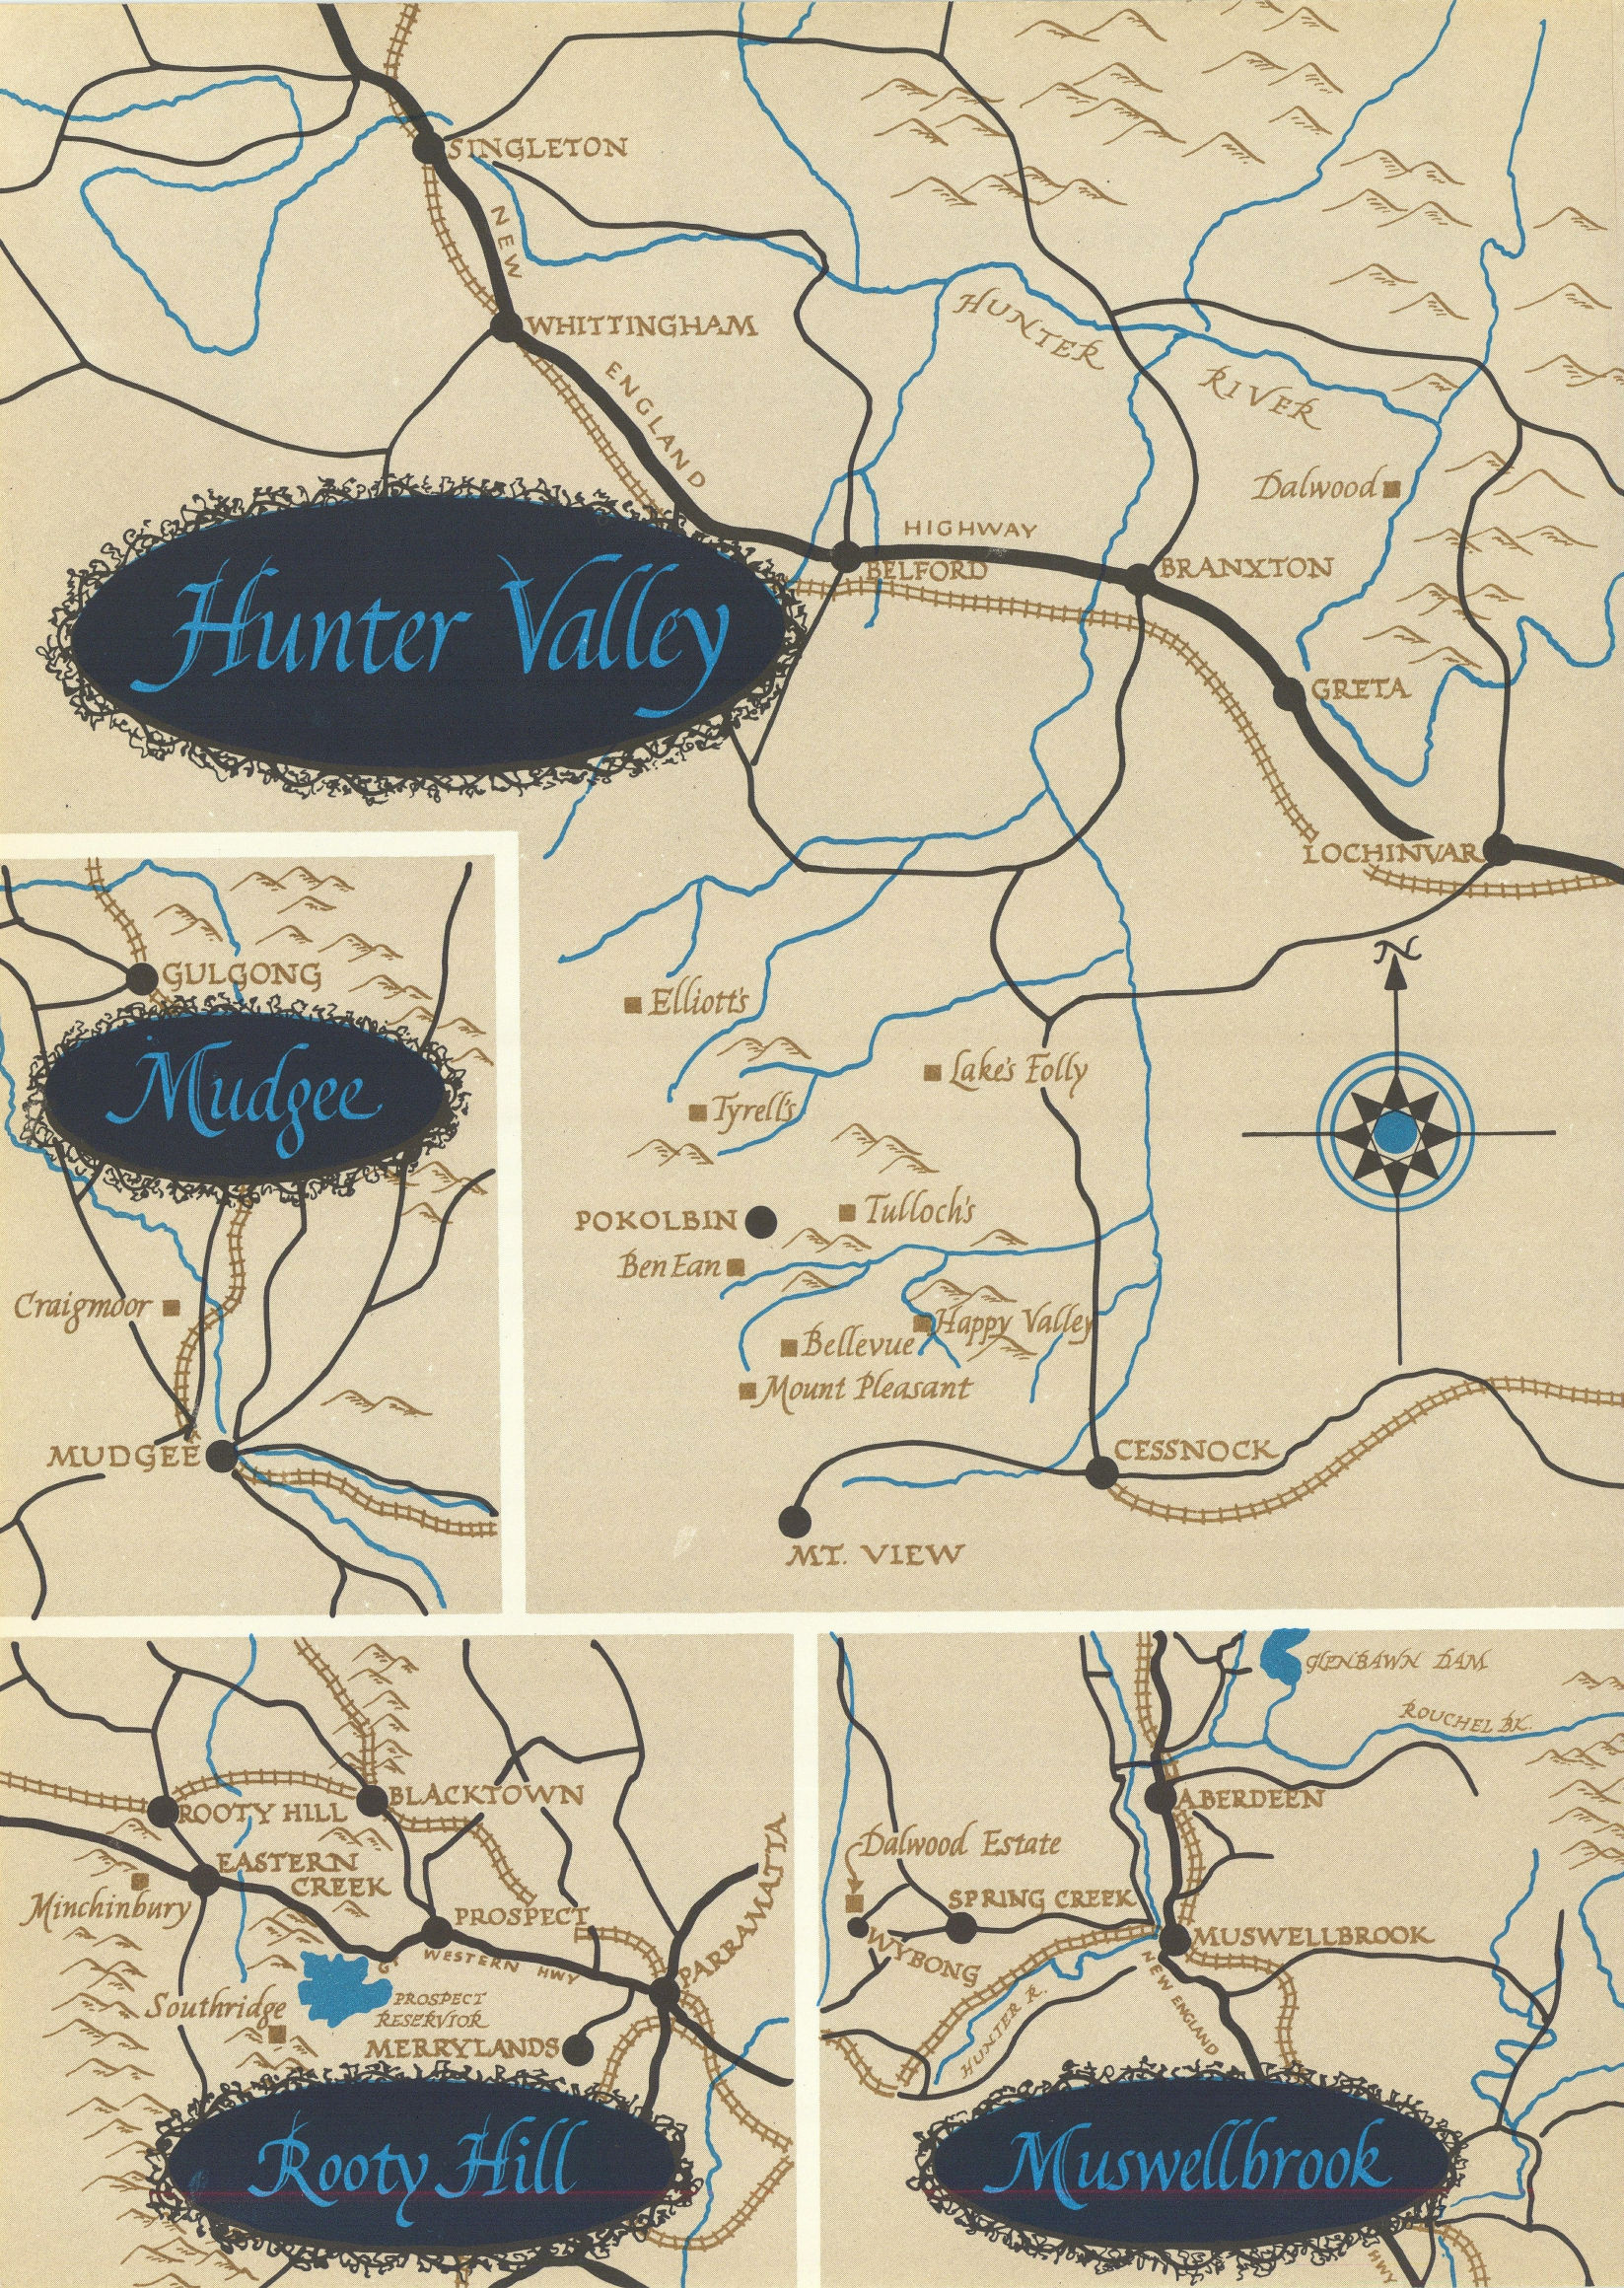 Associate Product Hunter Valley Mudgee Rooty Hill Muswellbrook. New South Wales wineries 1966 map